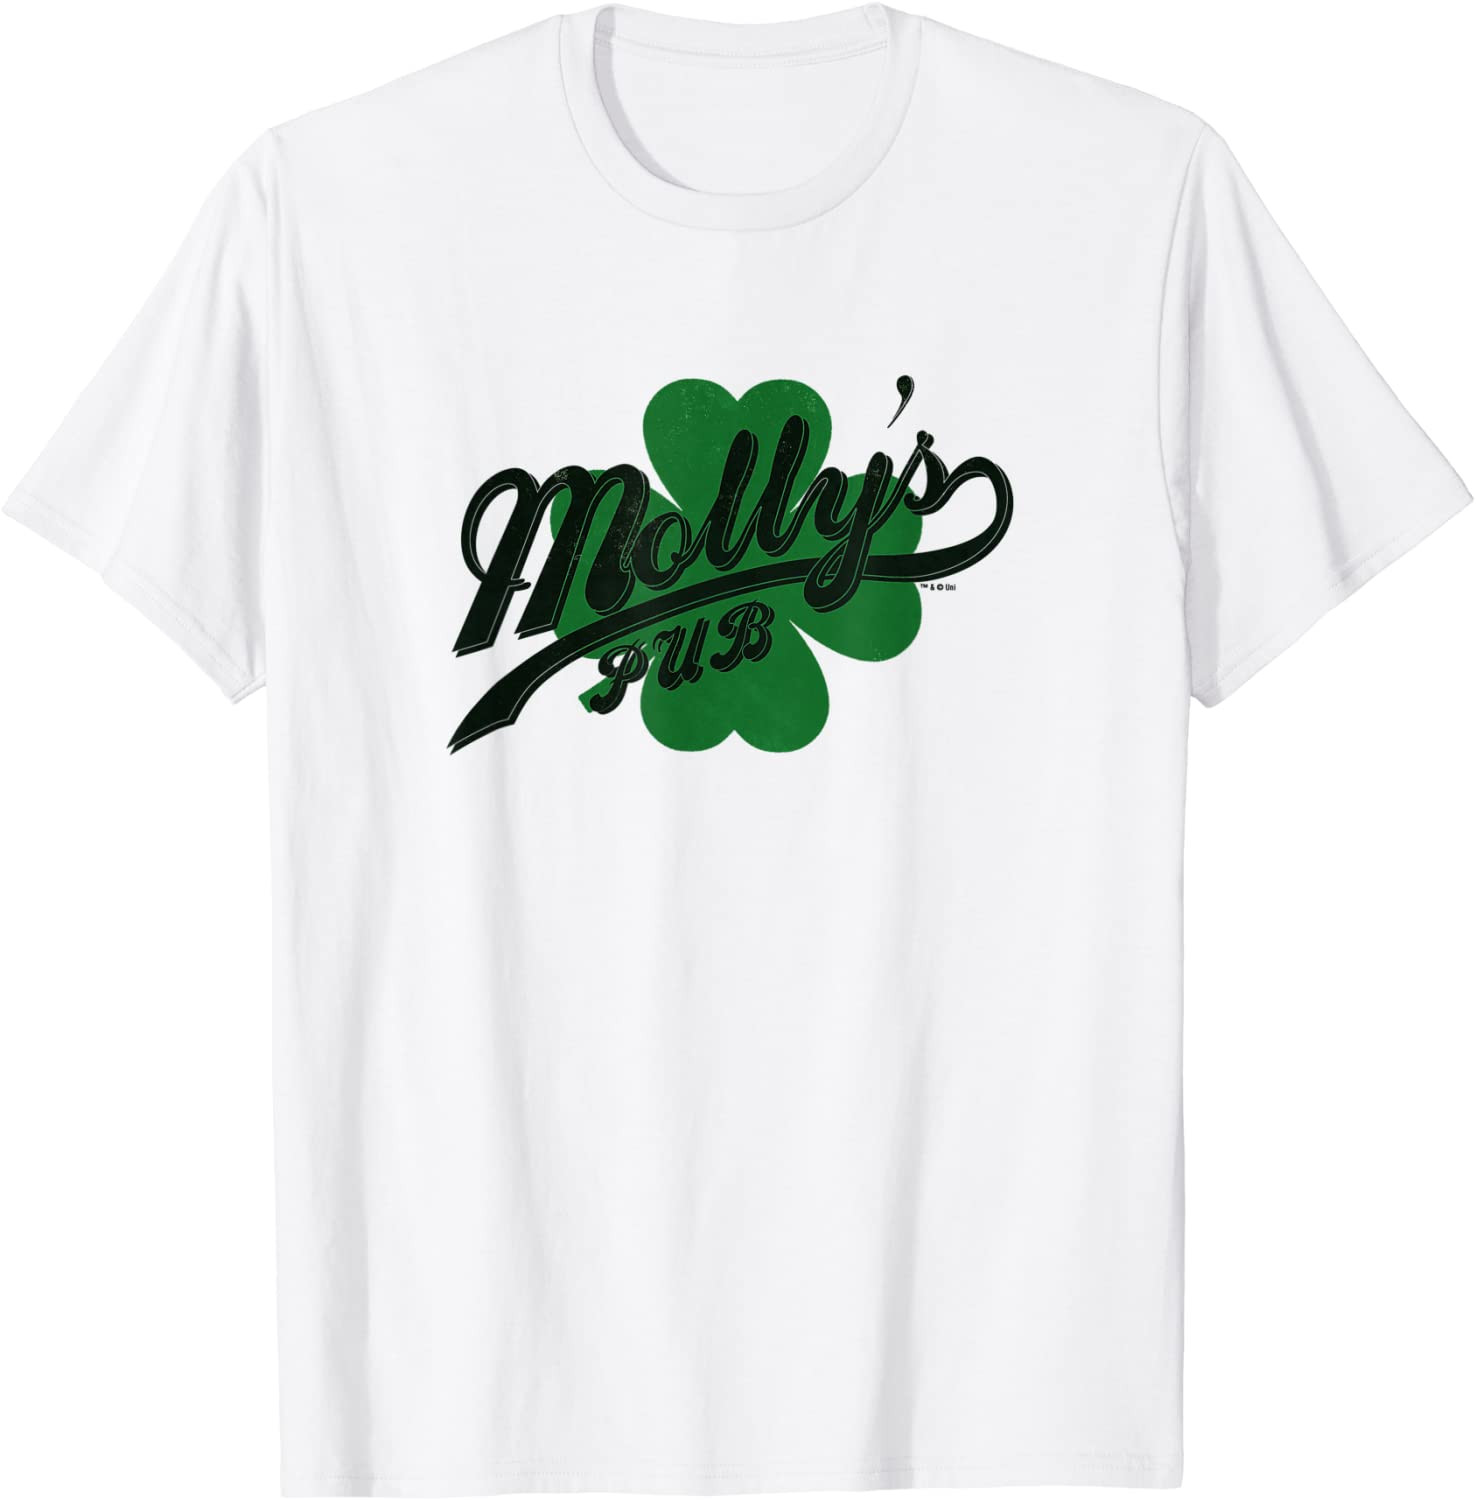 Chicago Fire Molly's Pub St. Paddy's Day Standard T-Shirt